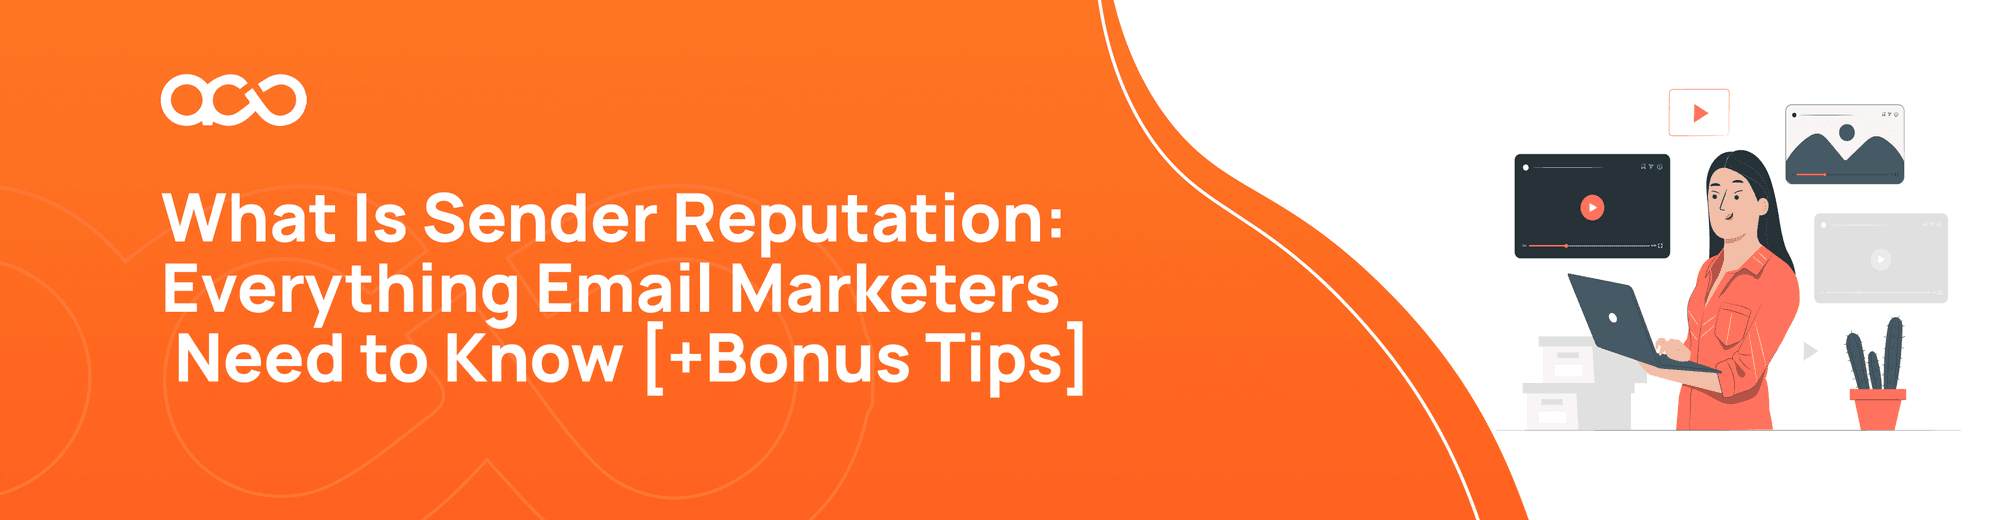 What Is Sender Reputation: Everything Email Marketers Need to Know [+Bonus Tips] cover